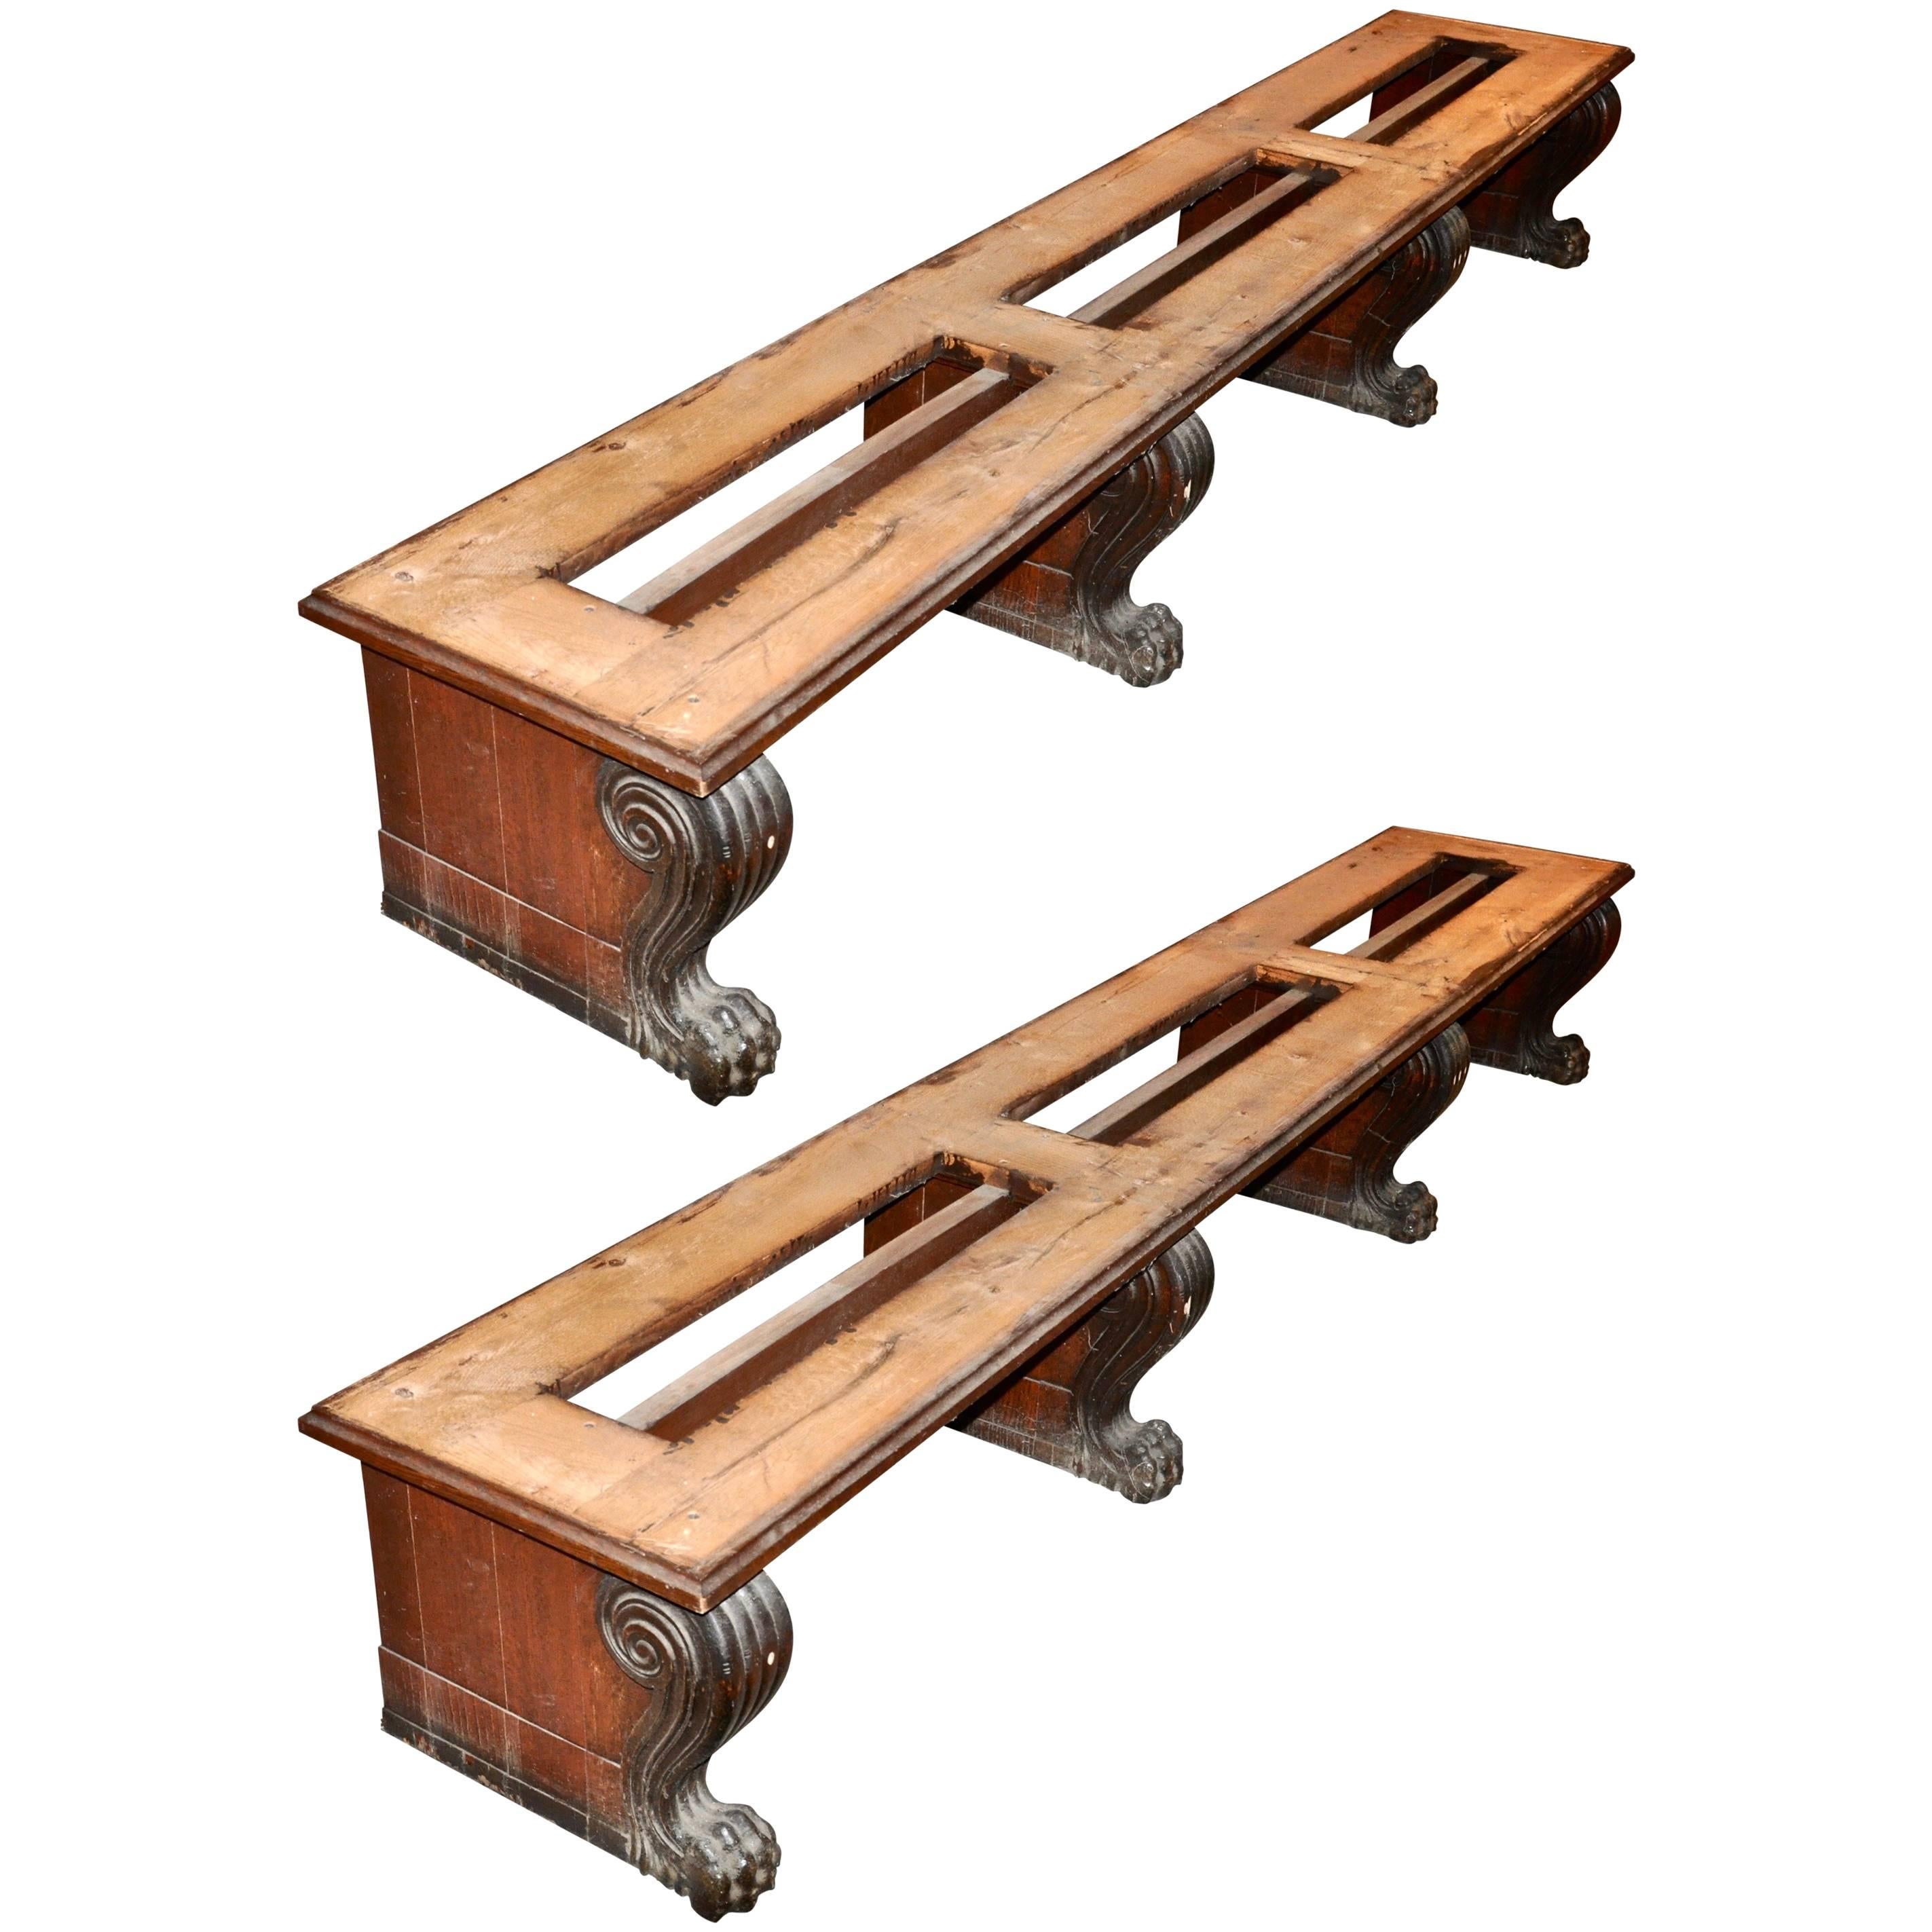 Pair of Oak Renaissance Revival Benches from the Boston Public Library